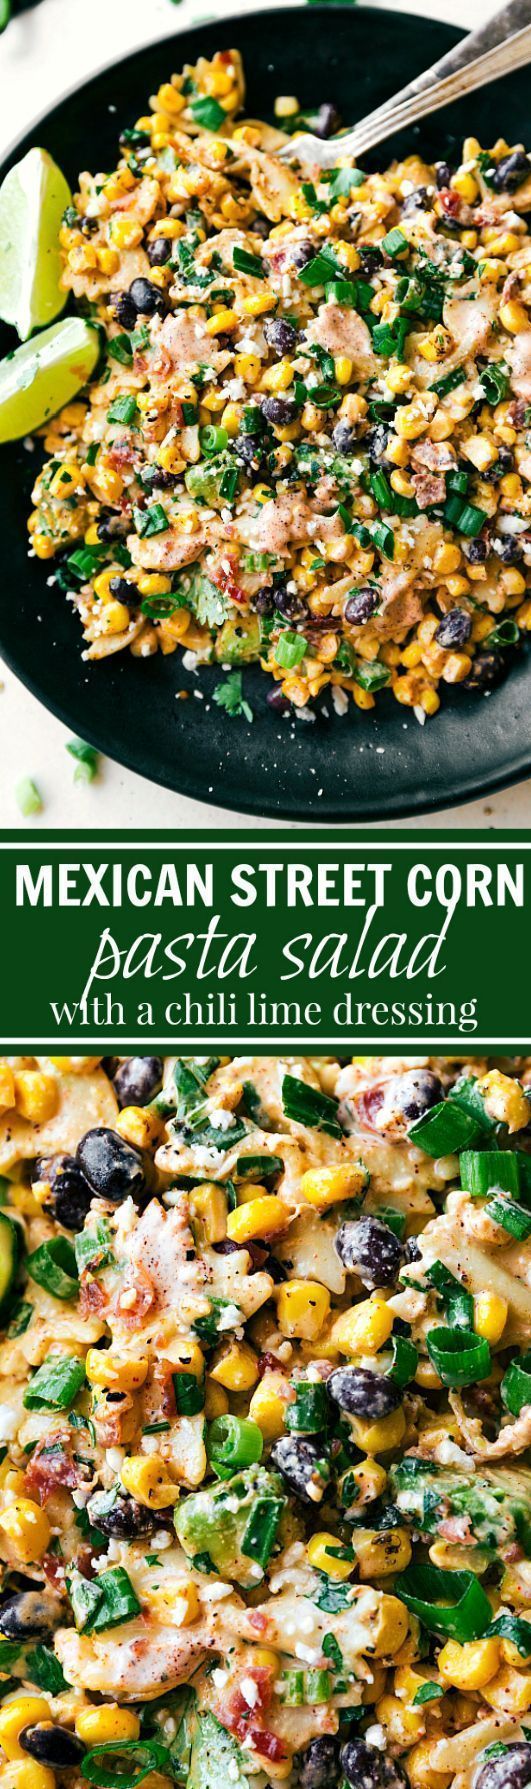 A delicious MEXICAN STREET CORN Pasta salad with tons of veggies, bacon, and a simple creamy CHILI LIME dressing.